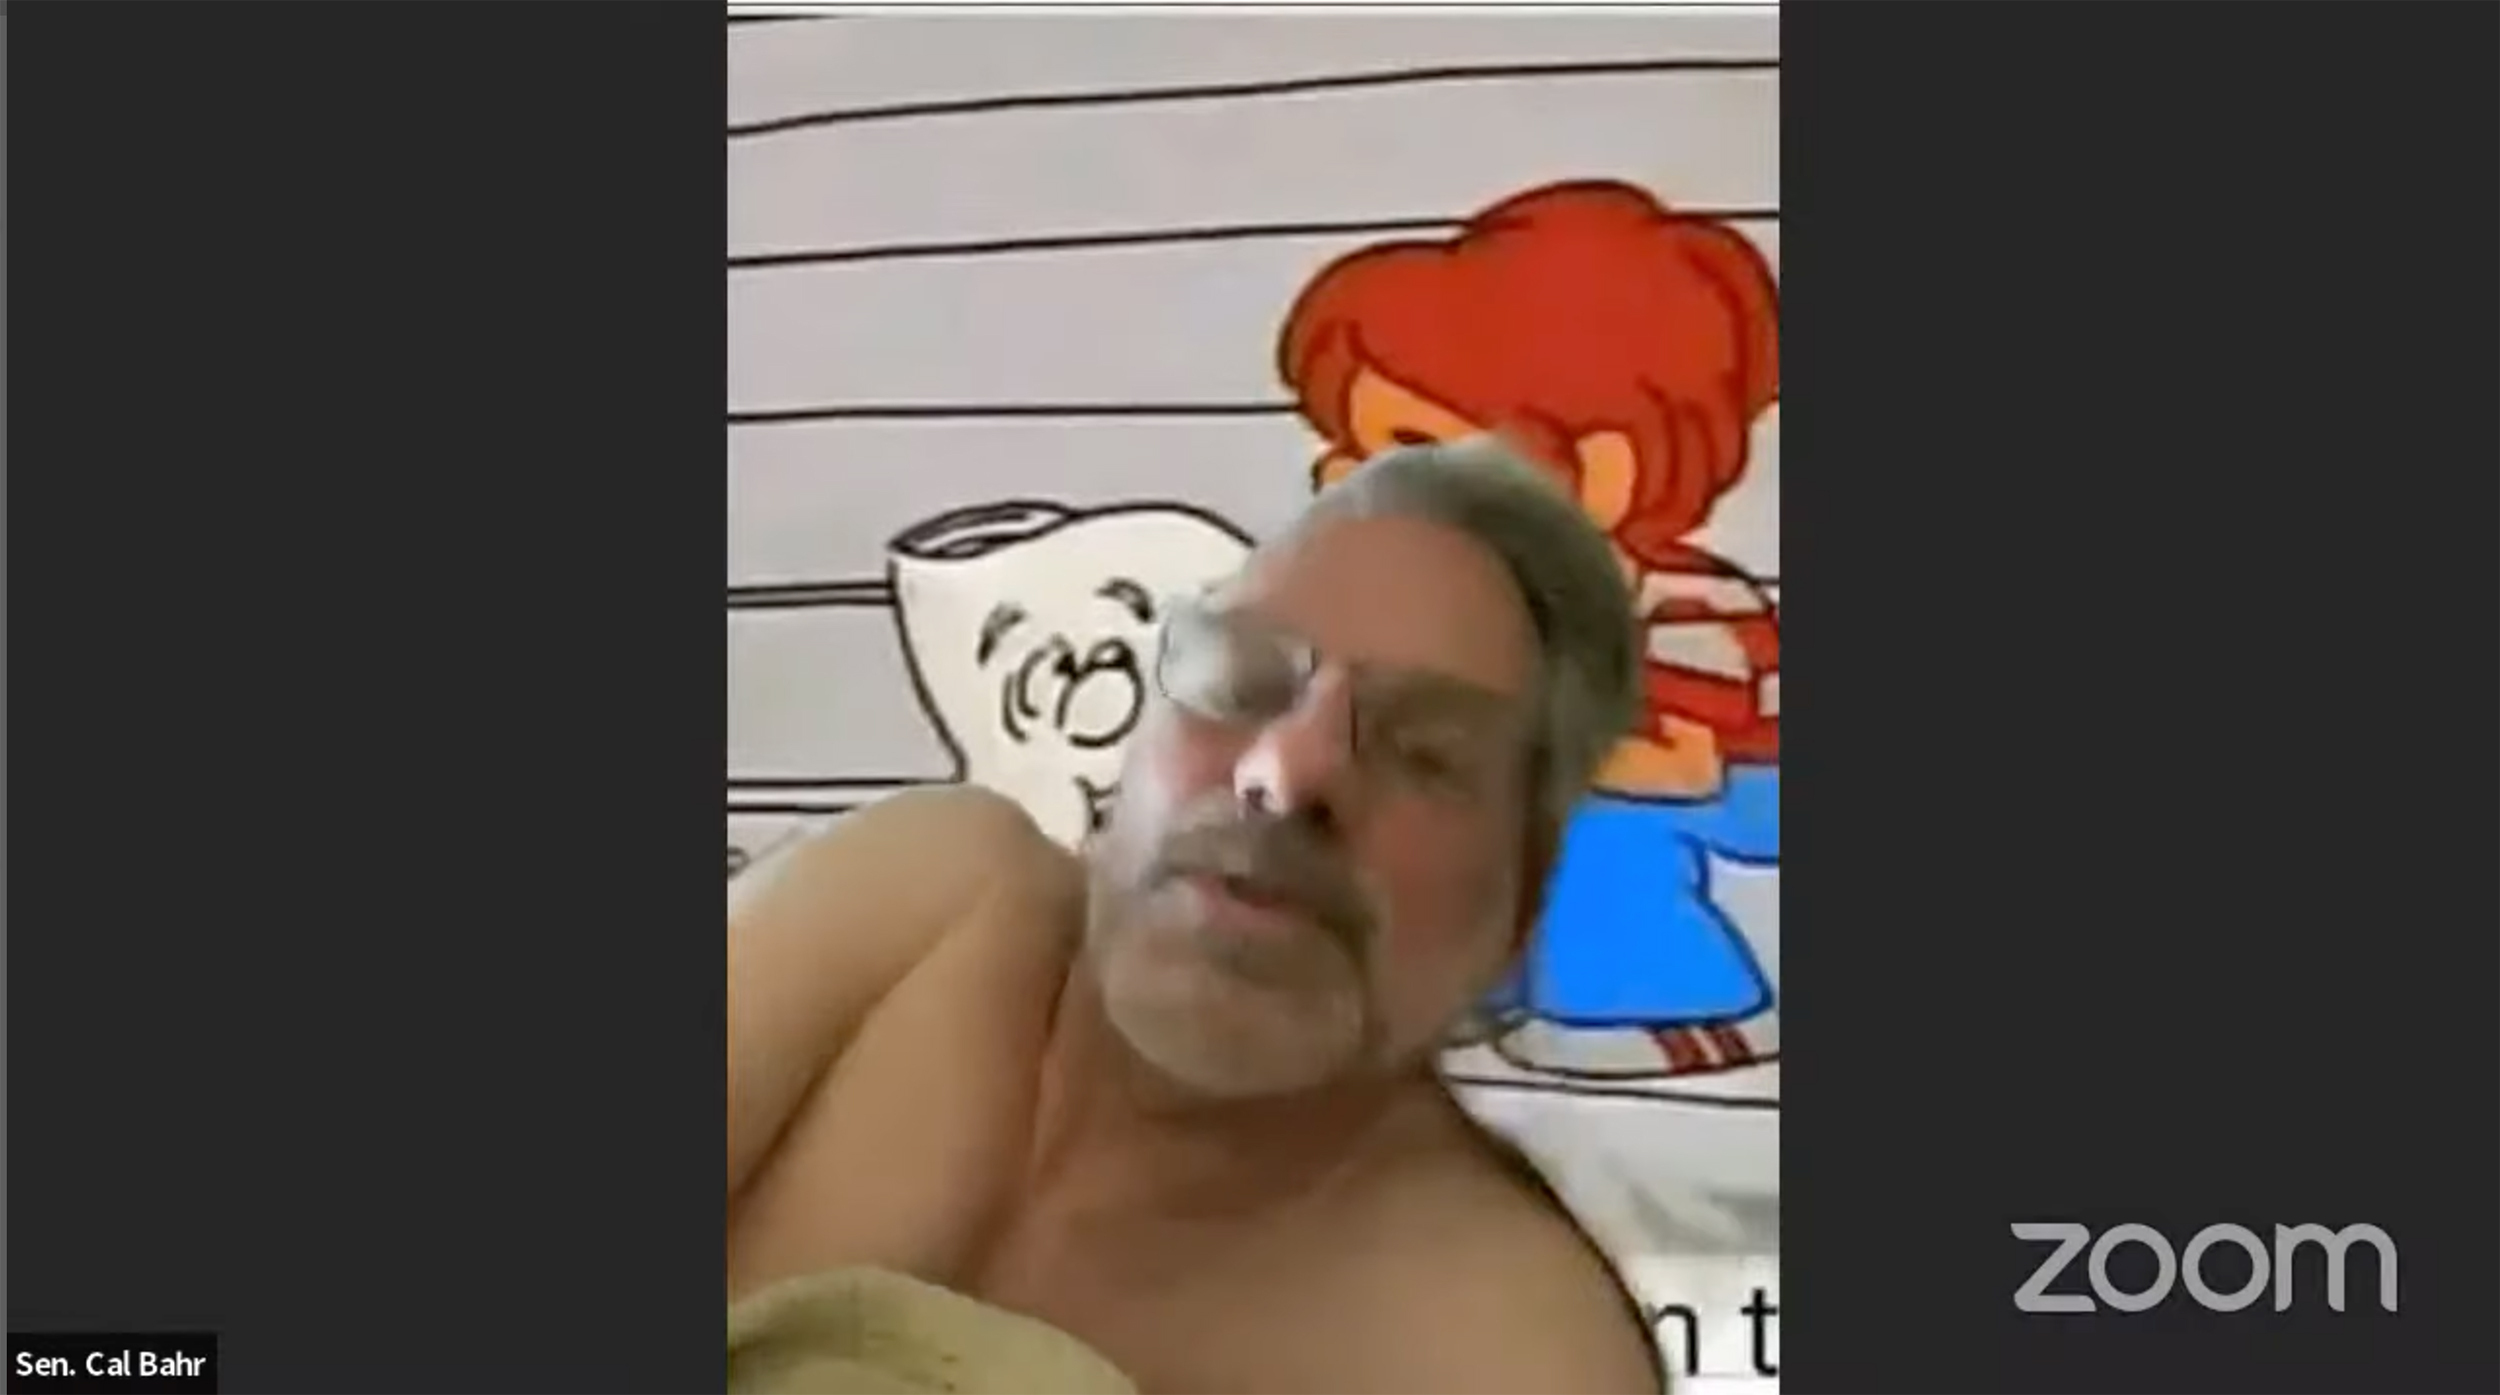 This image taken from Minnesota Office of the Legislative Auditor meeting via Zoom shows Sen. Calvin Bahr shirtless during a vote on Monday, May 1, 2023. In a video streamed on YouTube, Bahr, of East Bethel, can briefly be seen voting — with a School House Rock “I’m Just a Bill” character on the wall behind him — during a Zoom call on Monday with the Legislative Audit Commission. A GOP Senate spokeswoman said Bahr, a truck driver, worked until 4:45 a.m. and then went to bed before Monday's meeting. She said he would not comment on the vote or the video. The Minneapolis Star Tribune reported. ( Minnesota Office of the Legislative Auditor via AP)